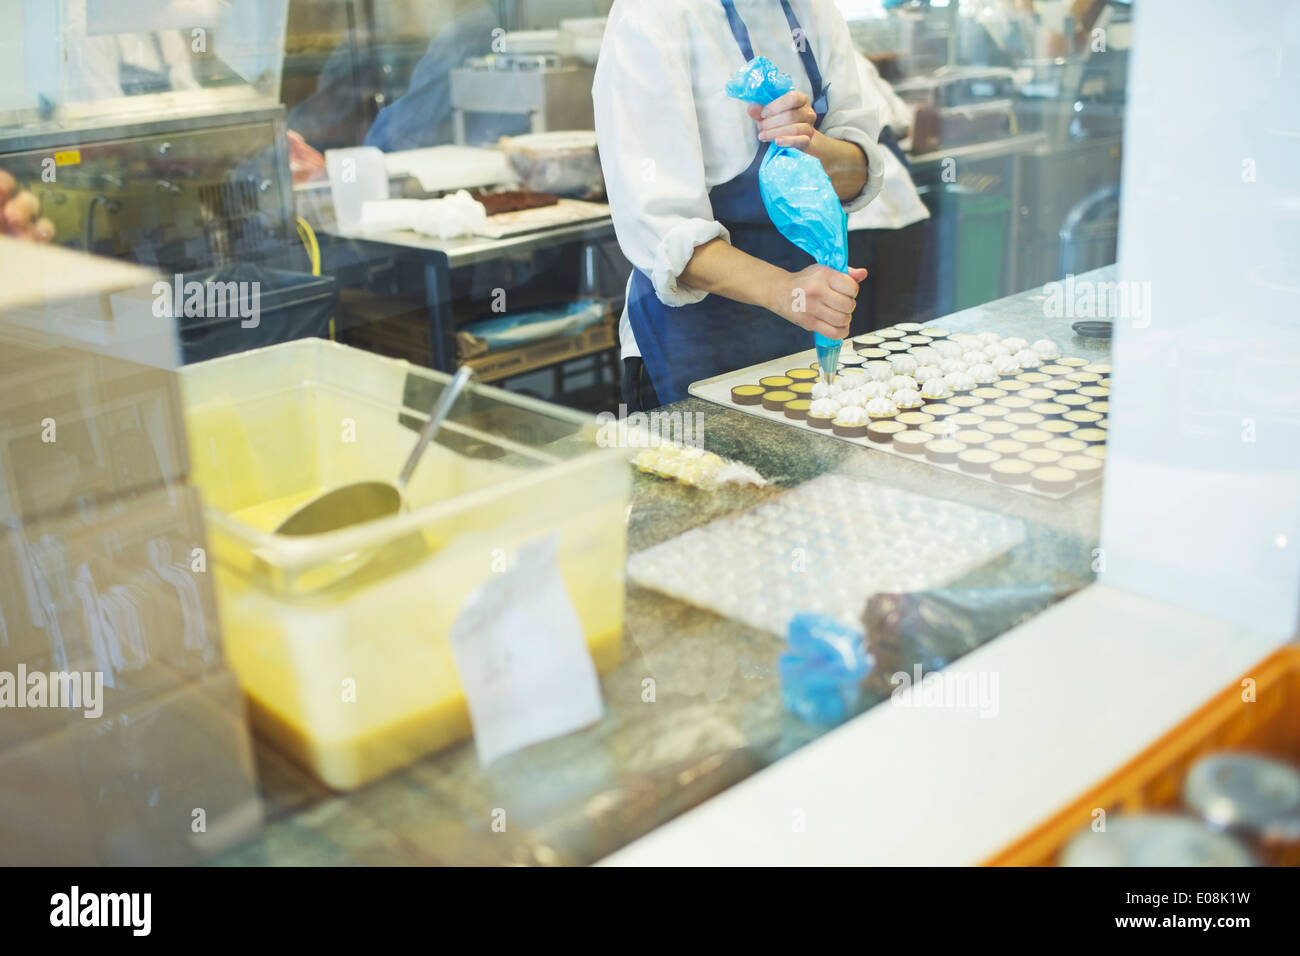 Midsection of female worker icing sweet food at display cabinet in cafe Stock Photo